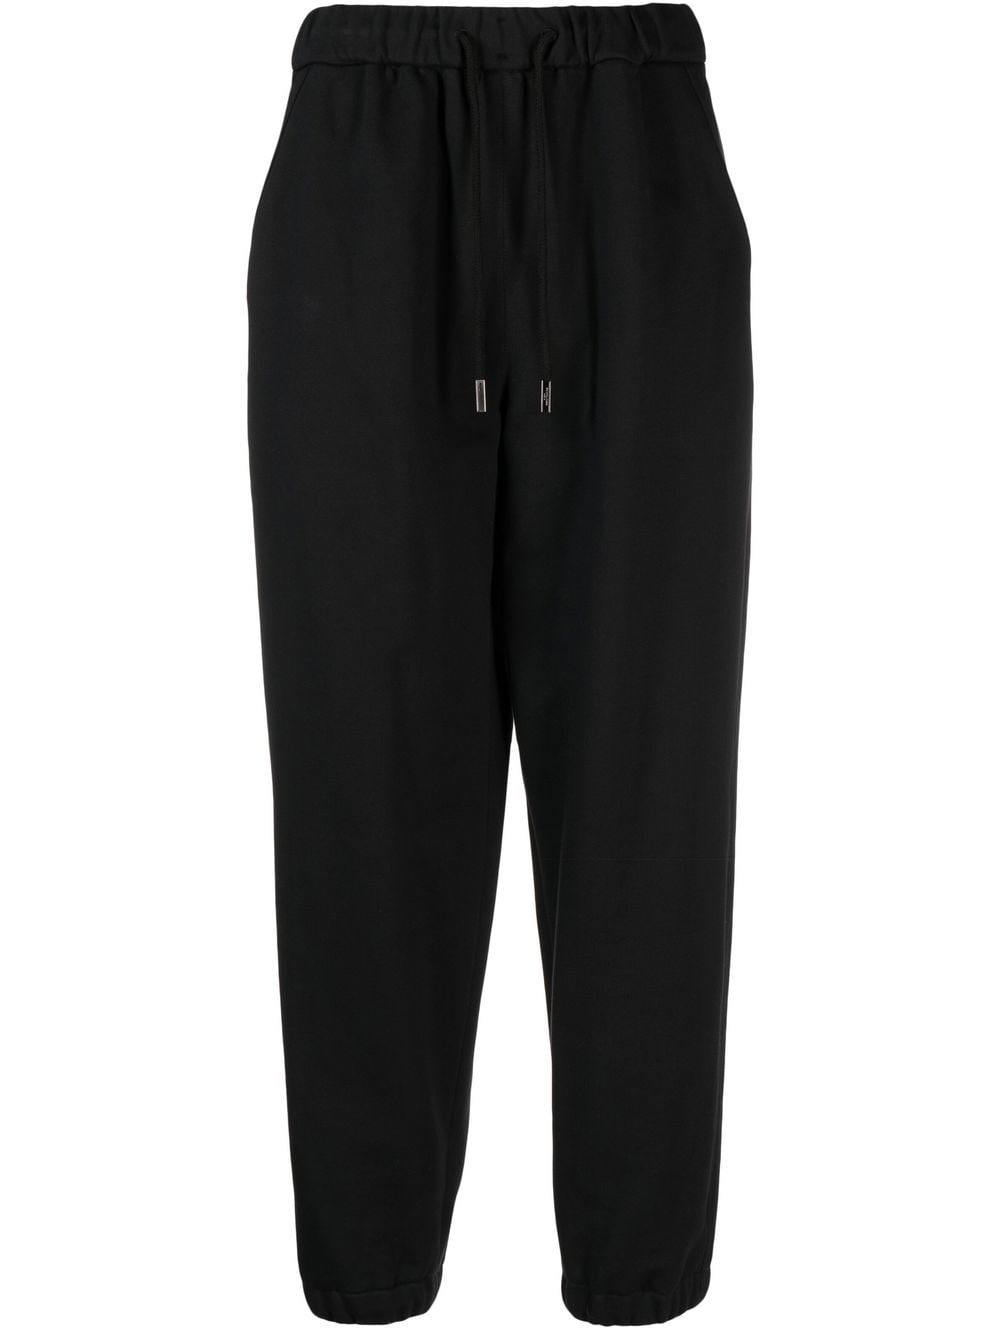 Wooyoungmi tapered drawstring track pants - Black von Wooyoungmi